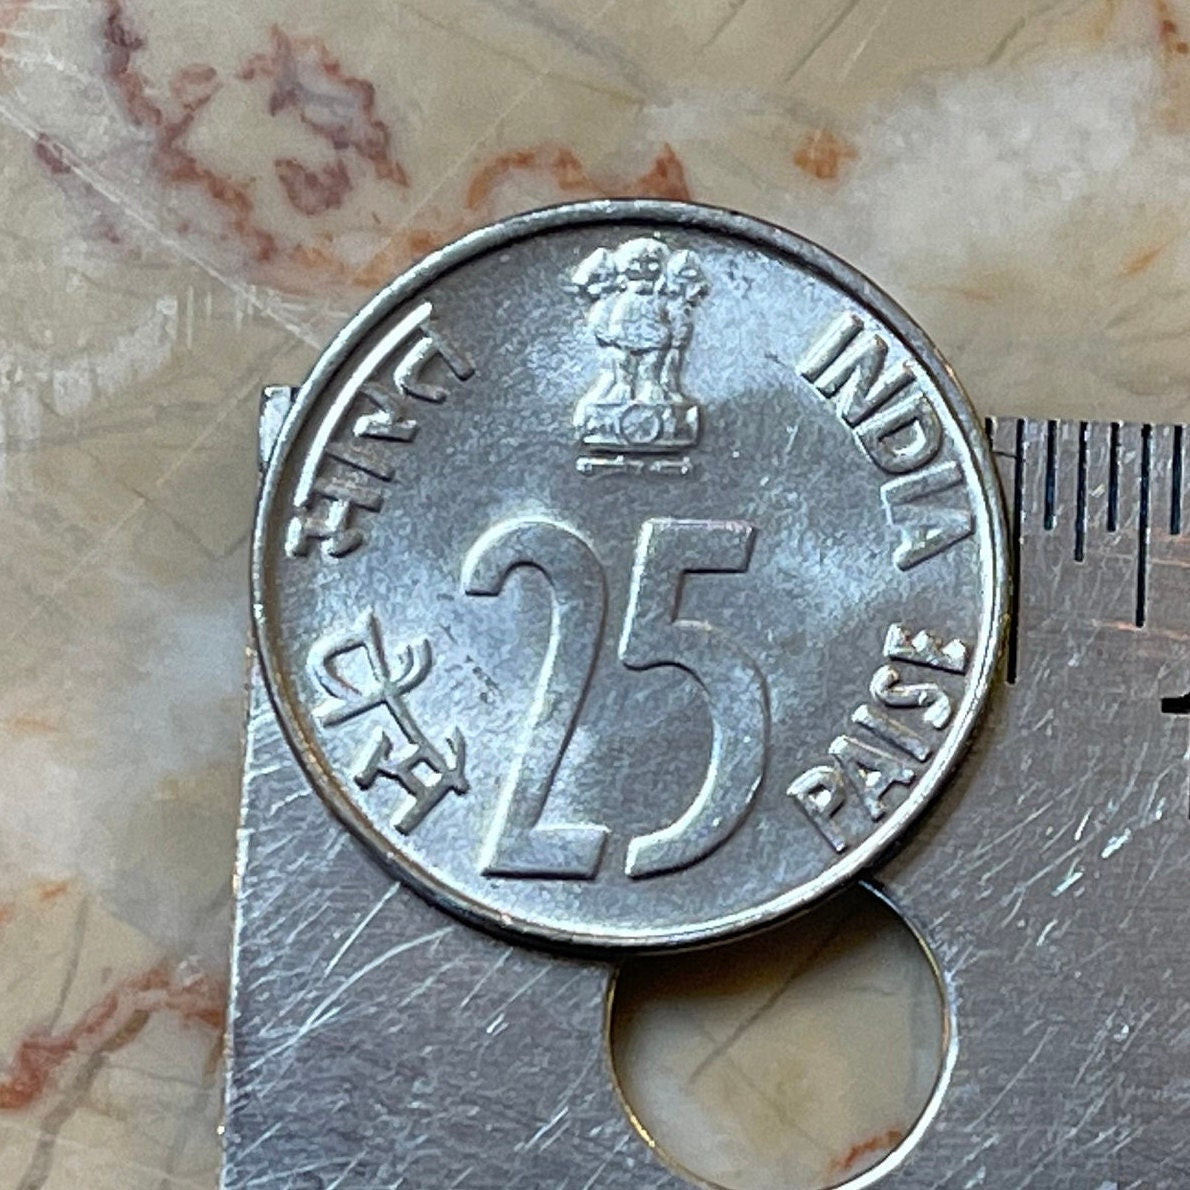 Rhinoceros & Ashoka Lion Capitol India 25 Paise Authentic Coin Money for Jewelry and Craft Making